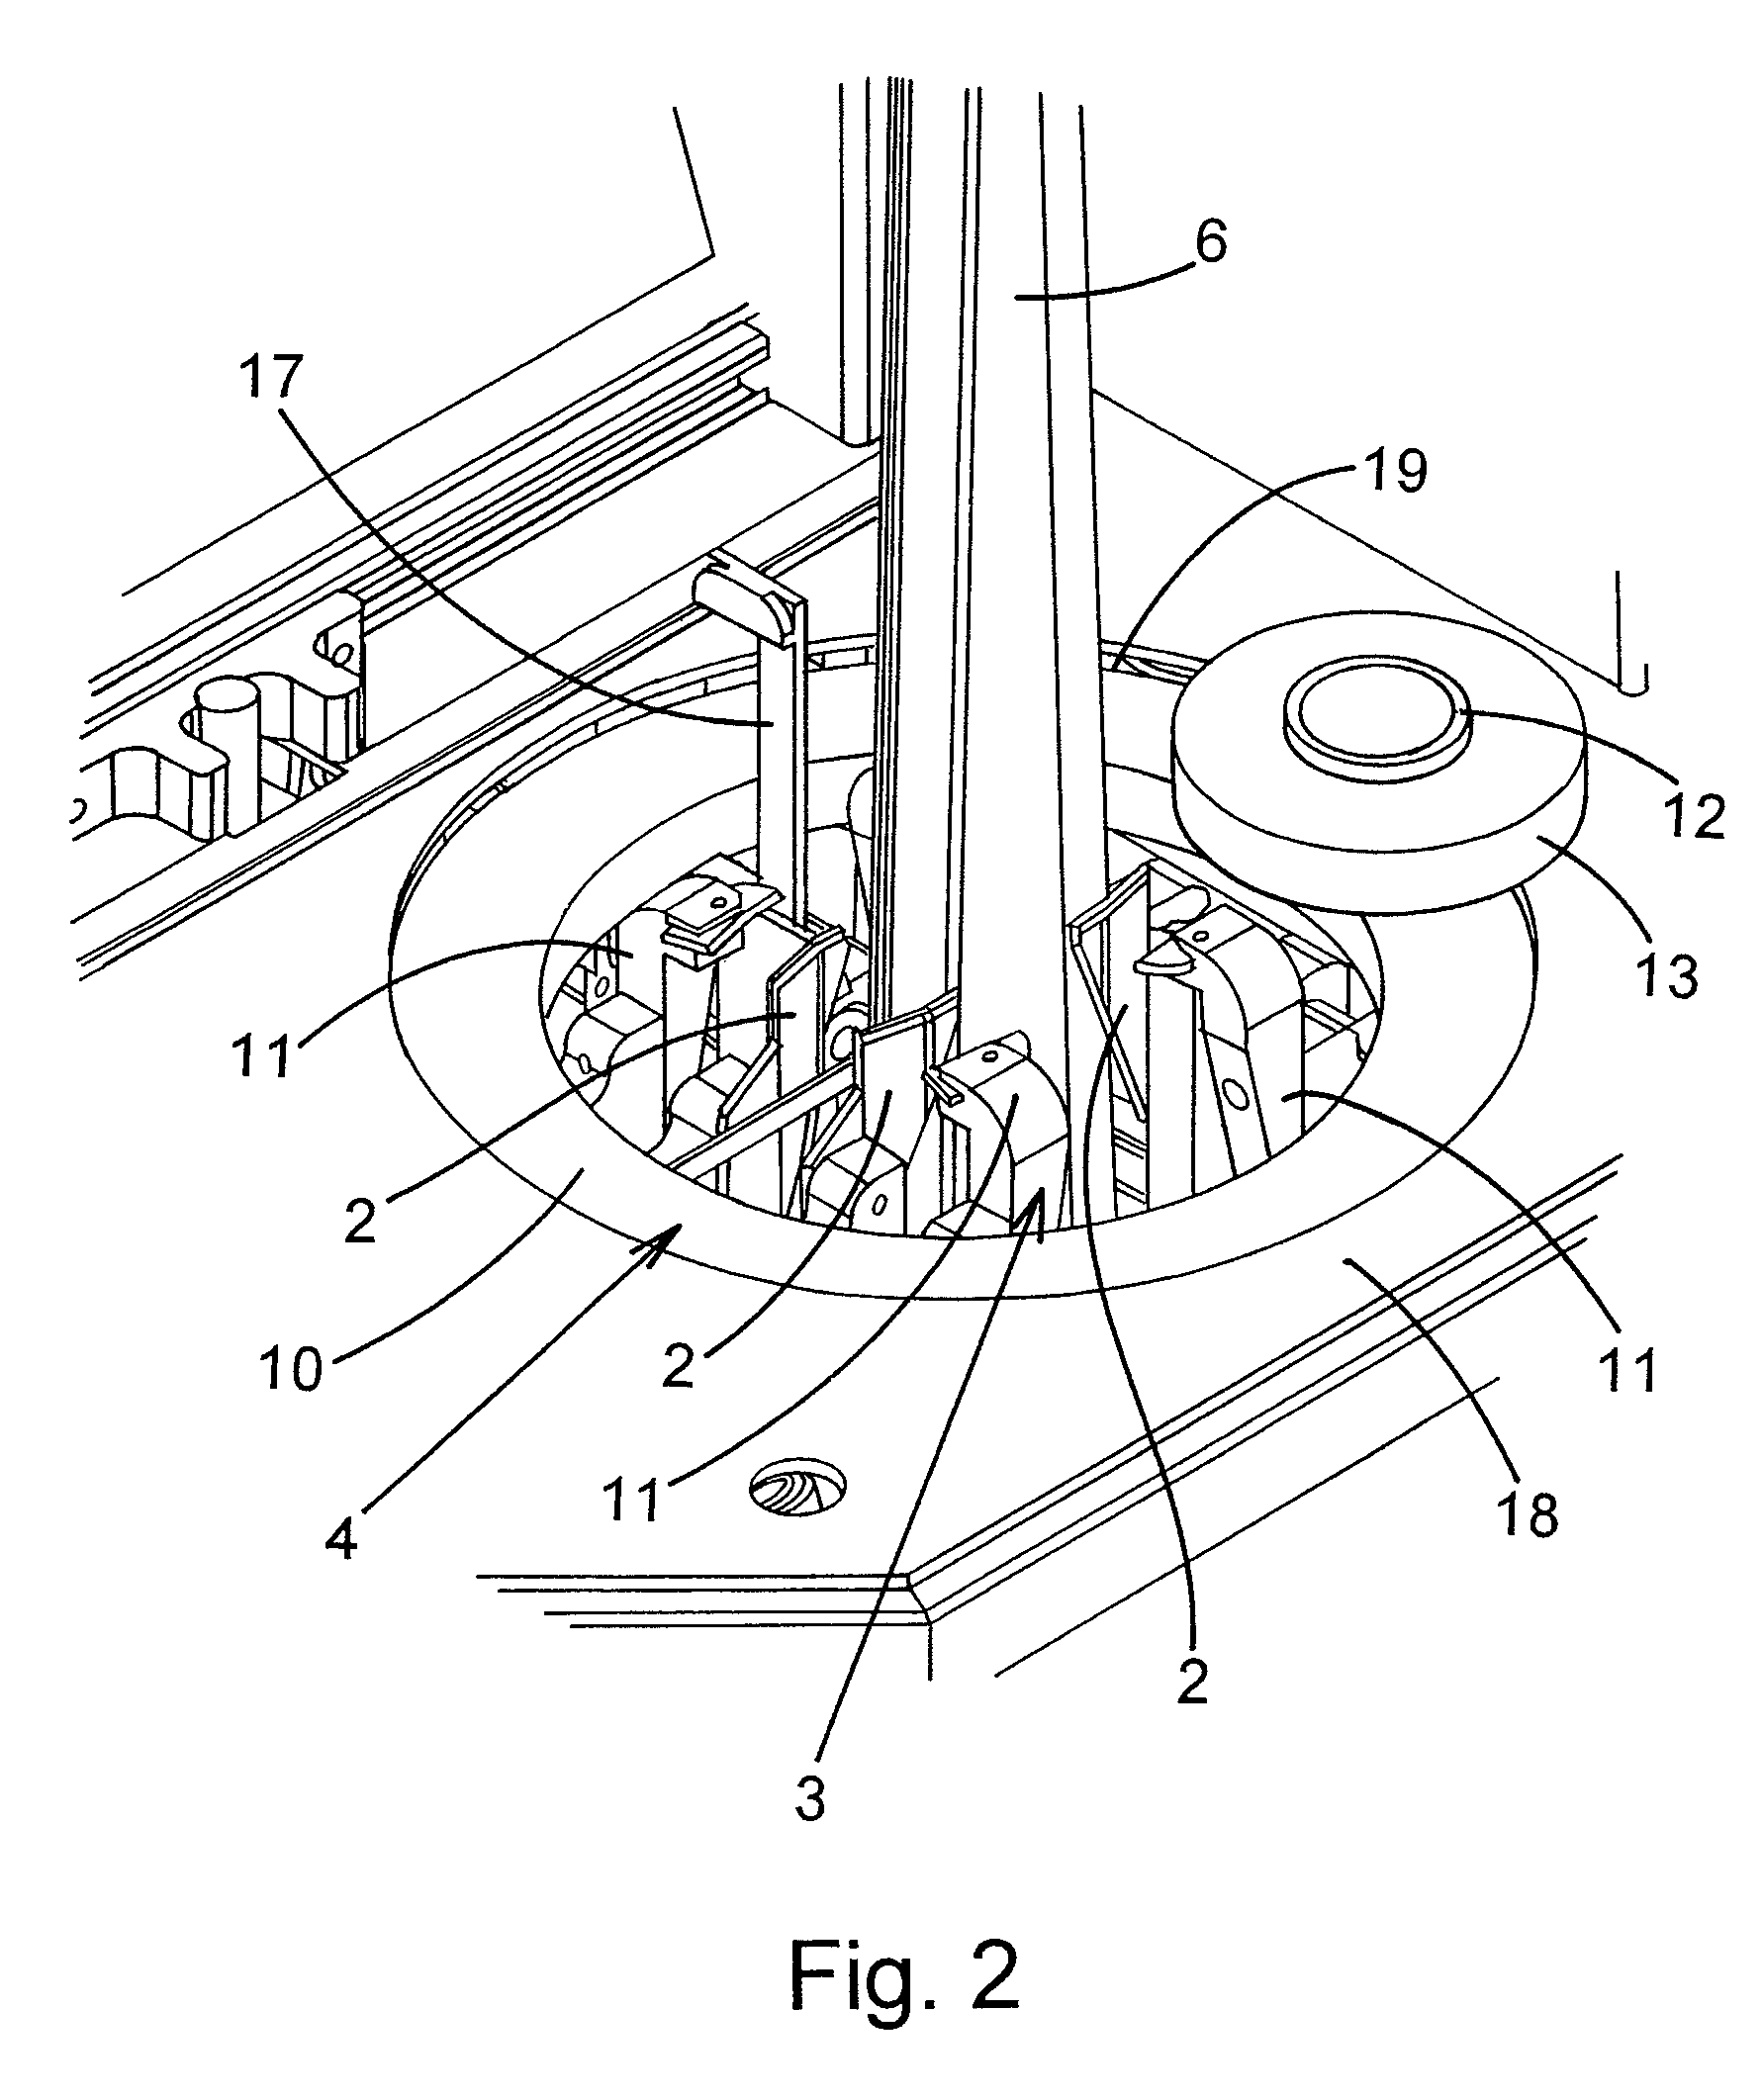 Method and apparatus for fastening fur on a pelting board and winding material therefor